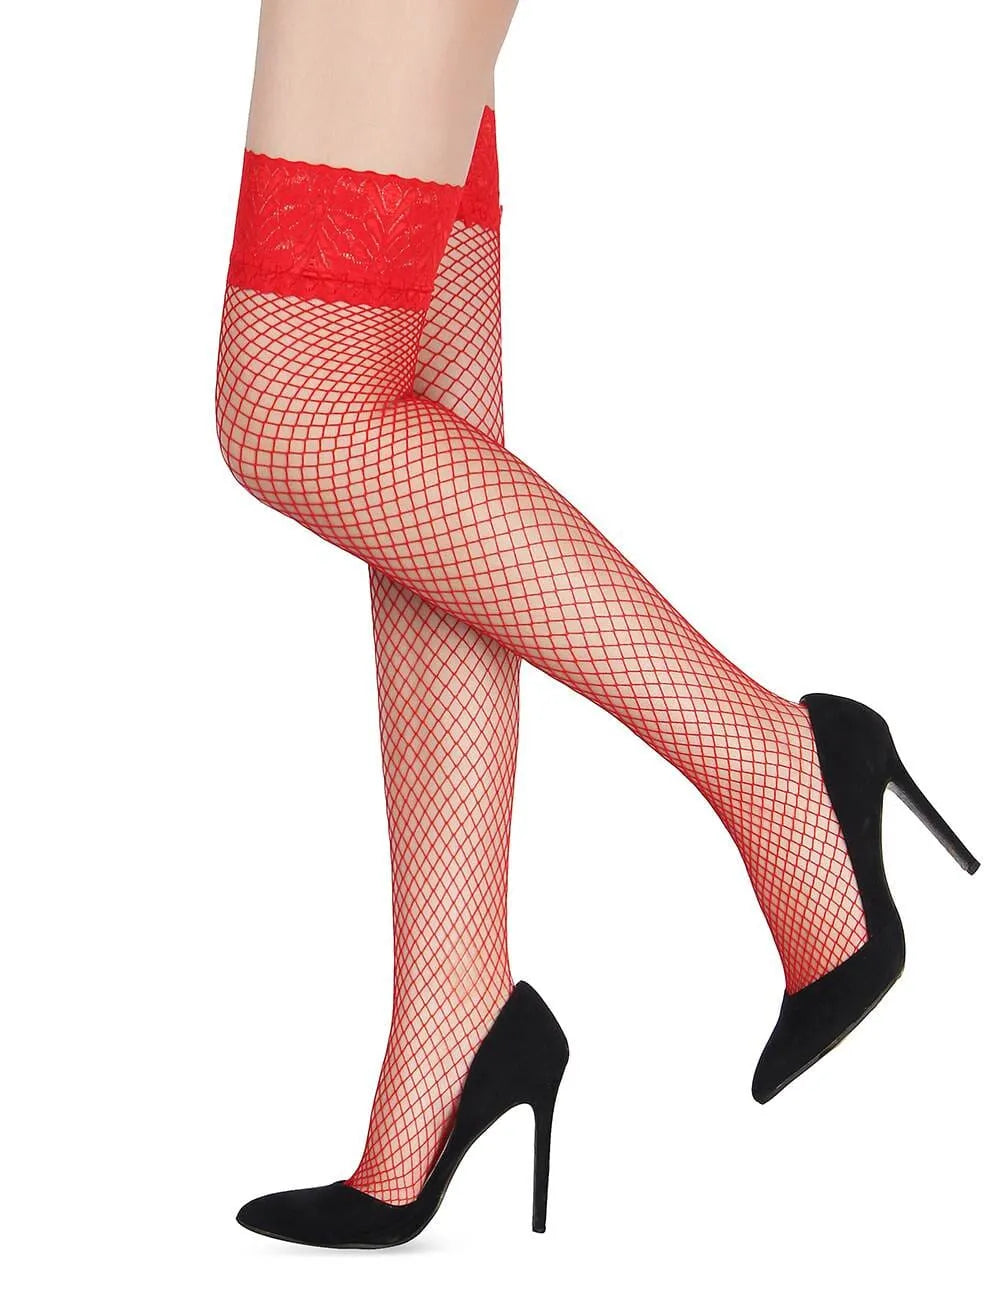 Scandals Lace Toped Fishnet Stockings Stockings & Hosiery Scandals Lingerie 